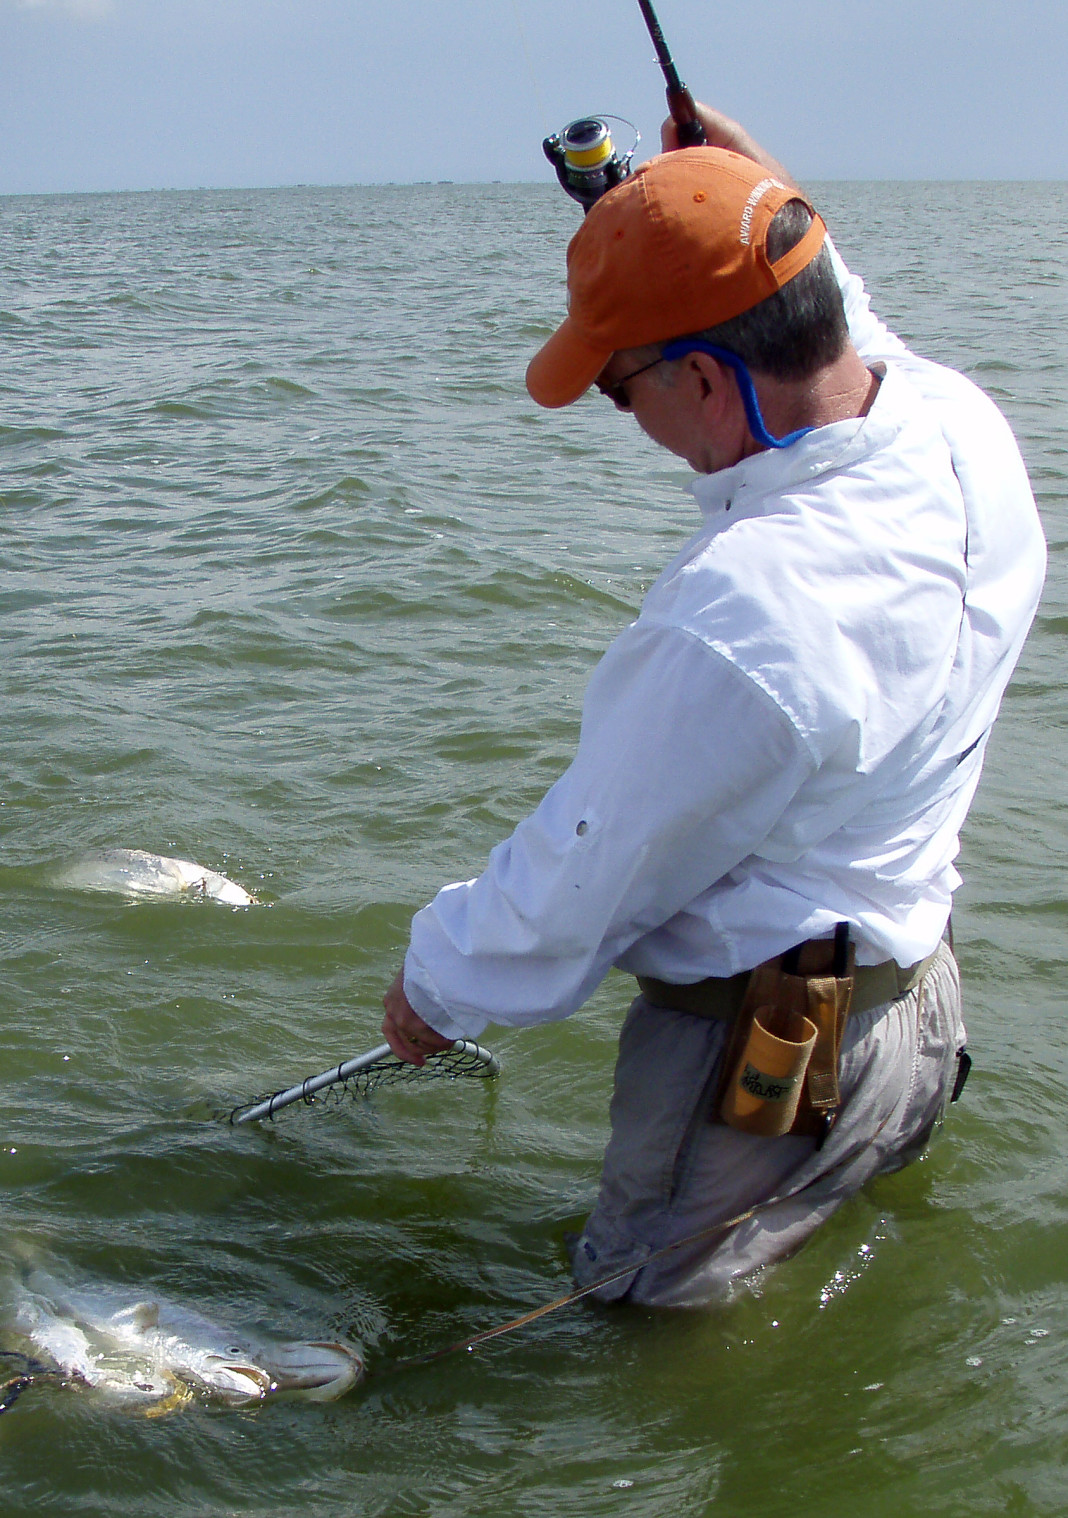 The limit for speckled trout across much of Texas is 10 fish per day between 15 and 25 inches.